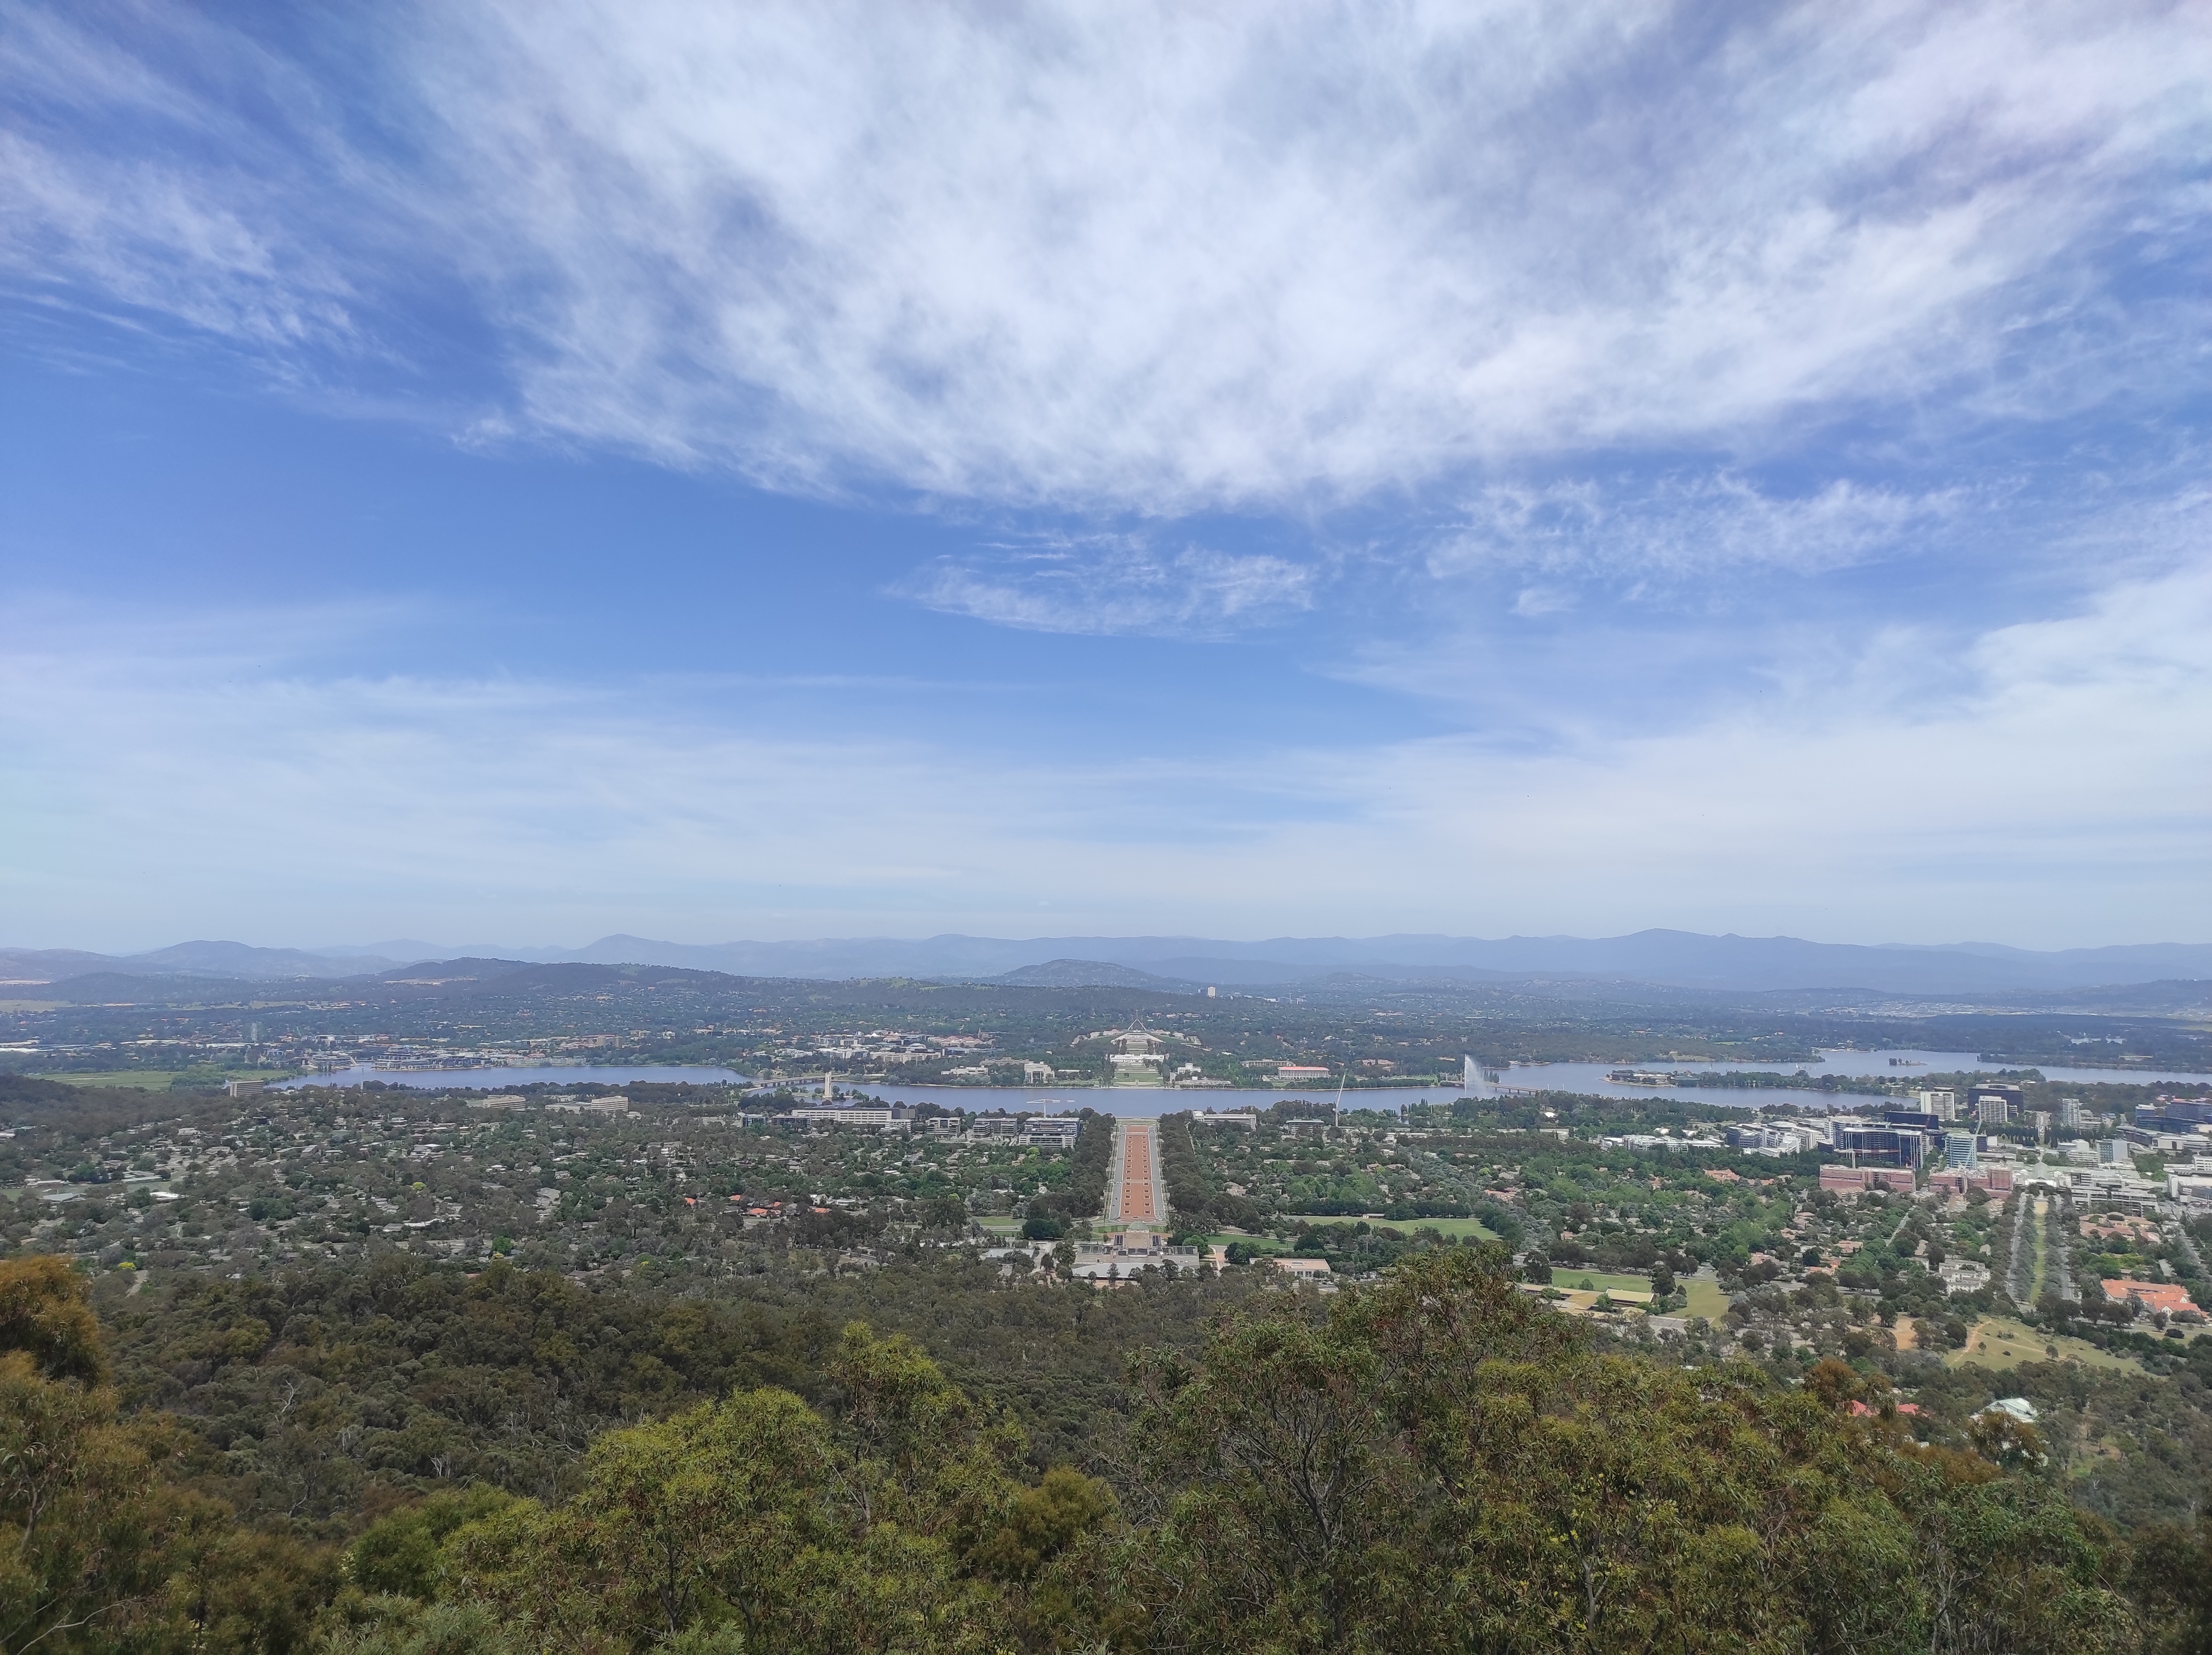 View of Canberra from the top of a hill with perspective on the Parliamentary Triangle